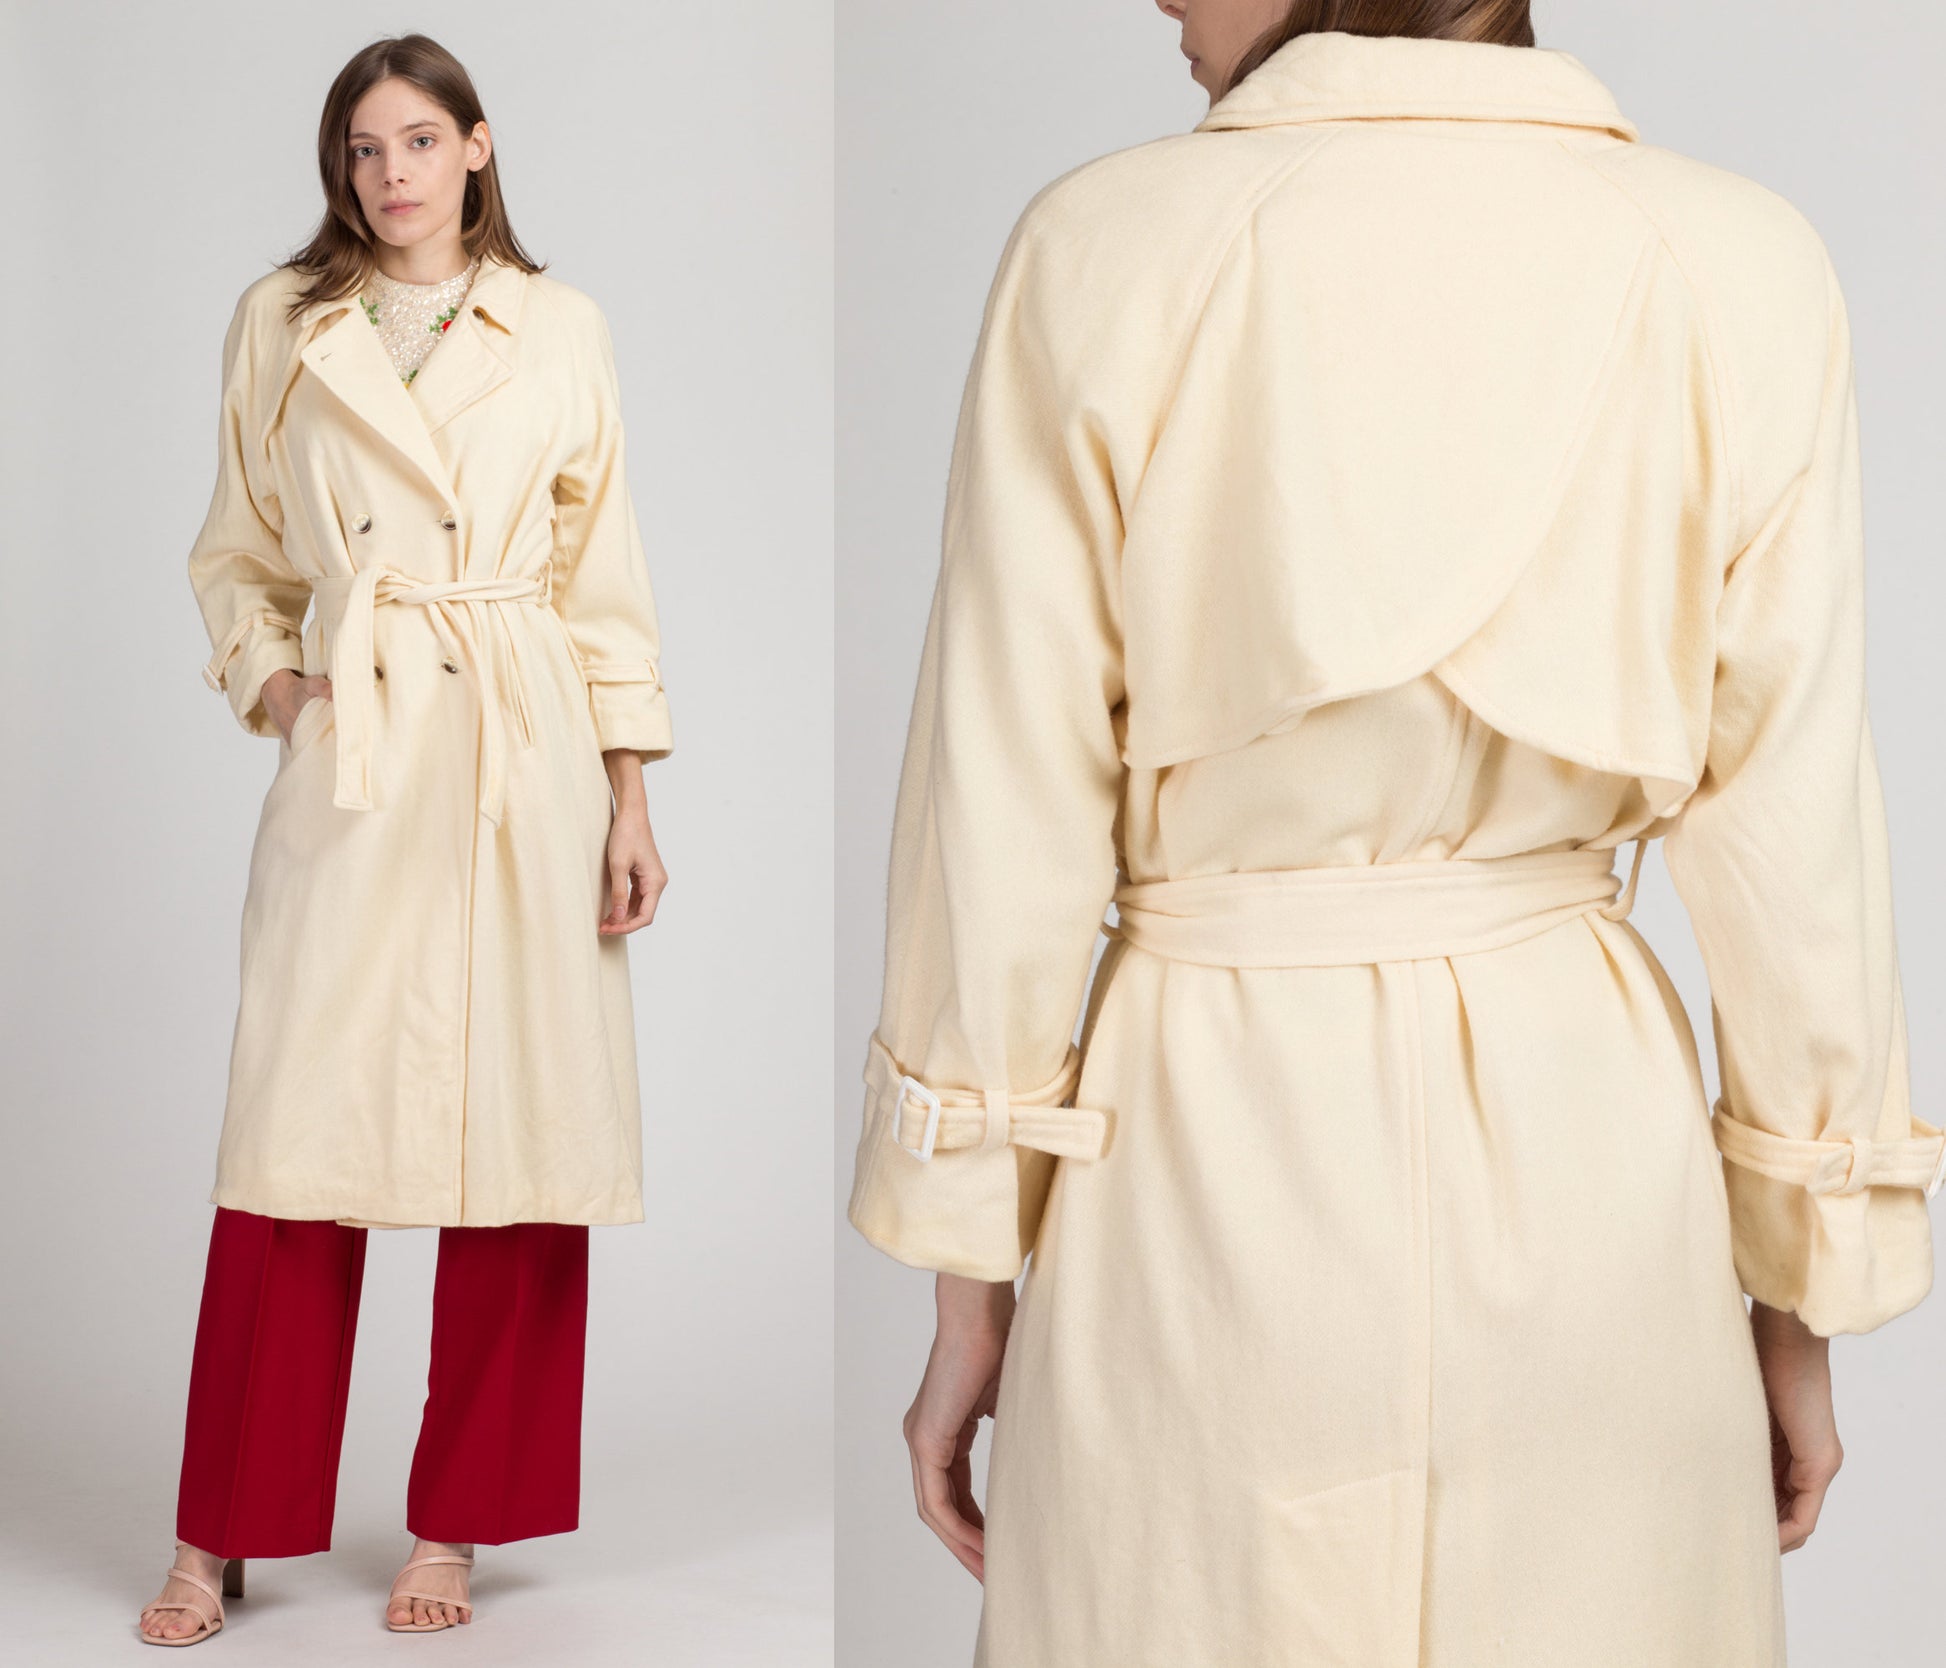 Vintage Cream Wool Belted Overcoat - Large | 80s Minimalist Double Breasted Long Coat